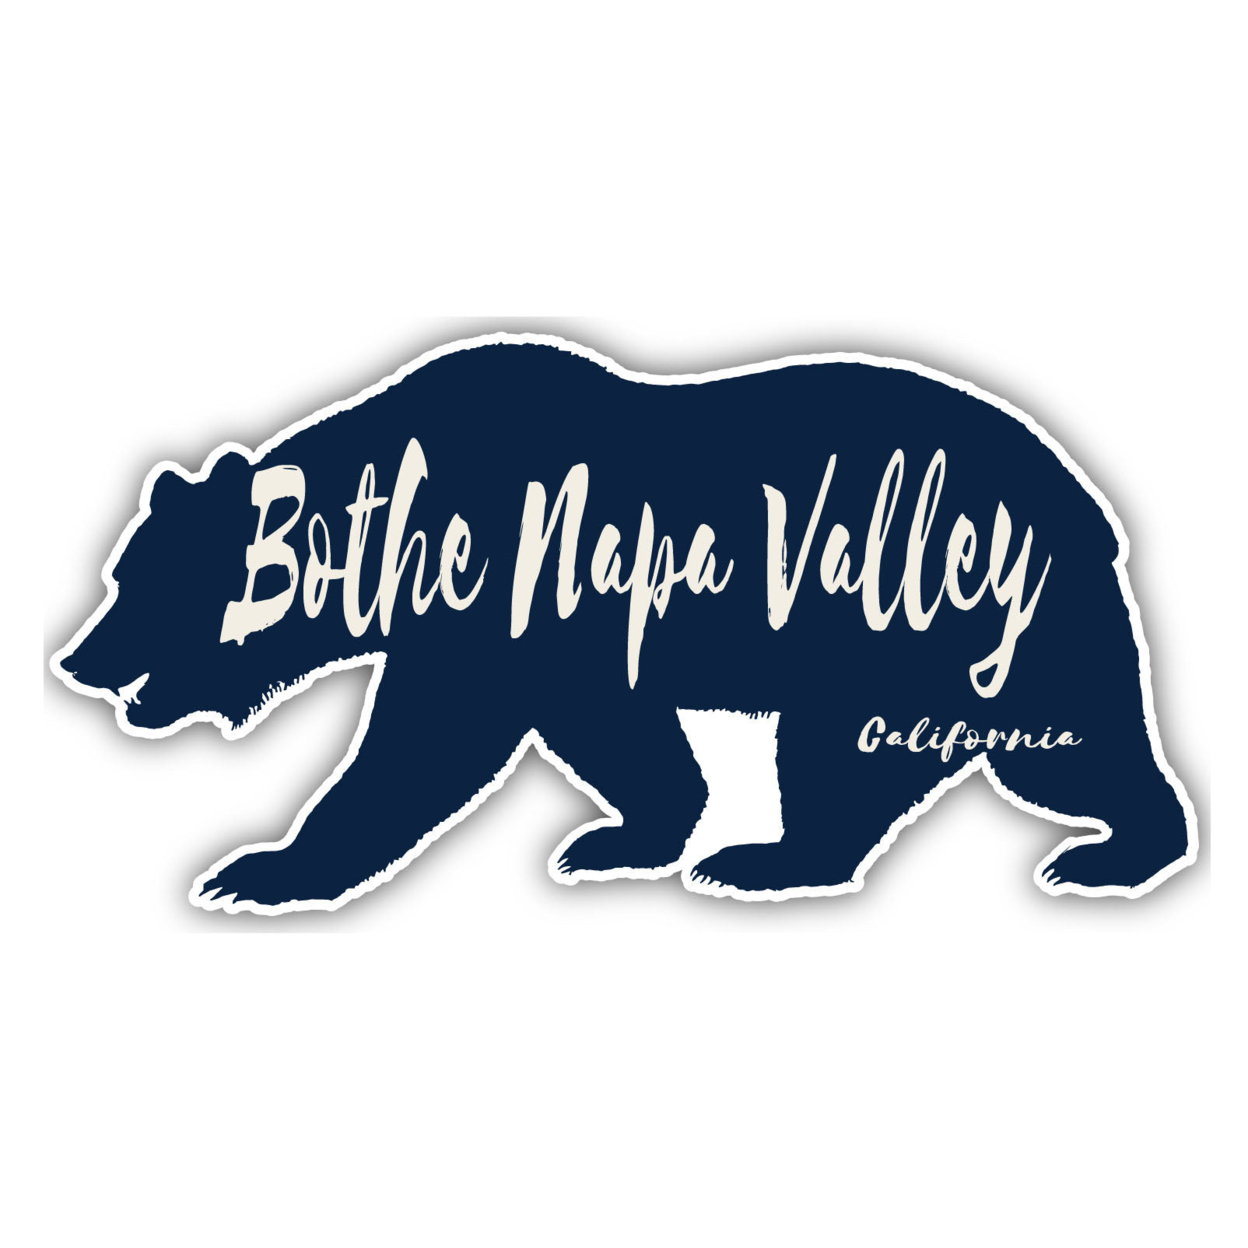 Bothe Napa Valley California Souvenir Decorative Stickers (Choose Theme And Size) - 4-Pack, 6-Inch, Bear